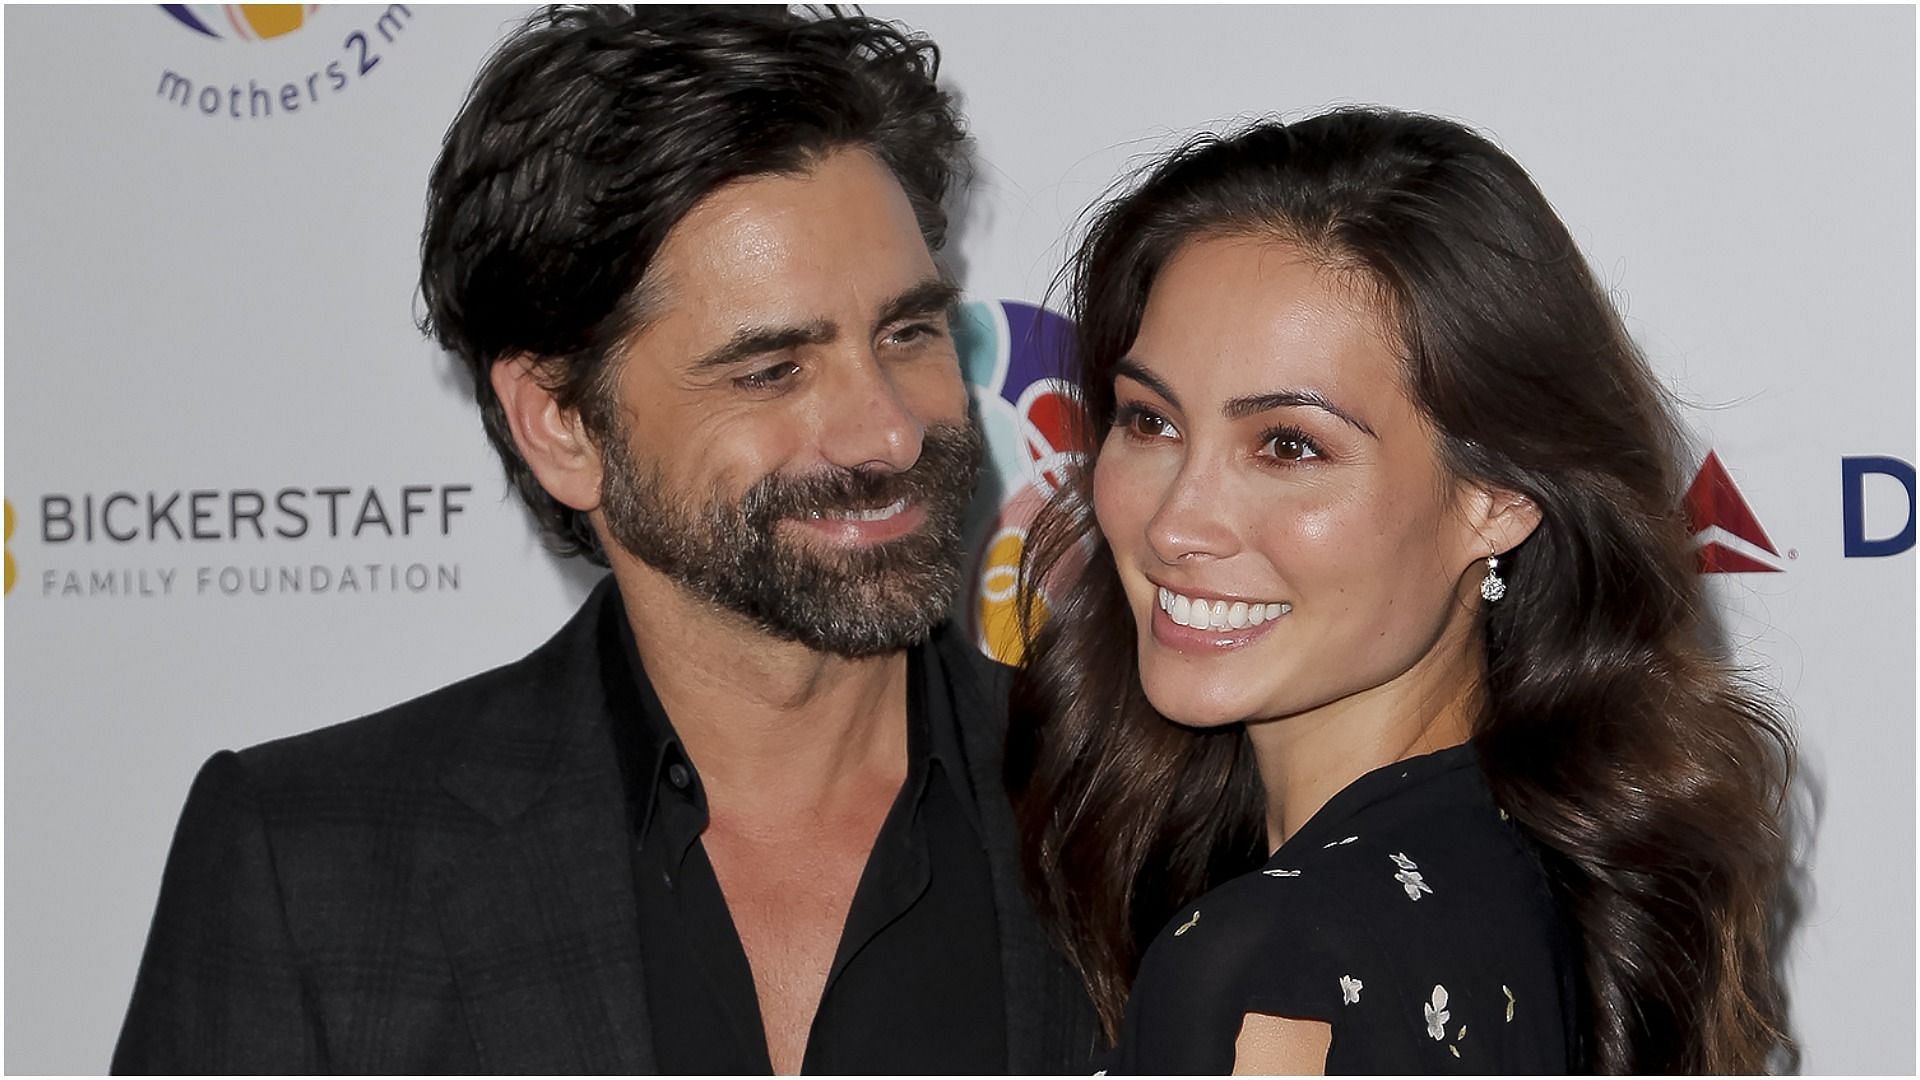 John Stamos and Caitlin McHugh got engaged in 2017 and welcomed their first child a year later (Image via Tibrina Hobson/Getty Images)